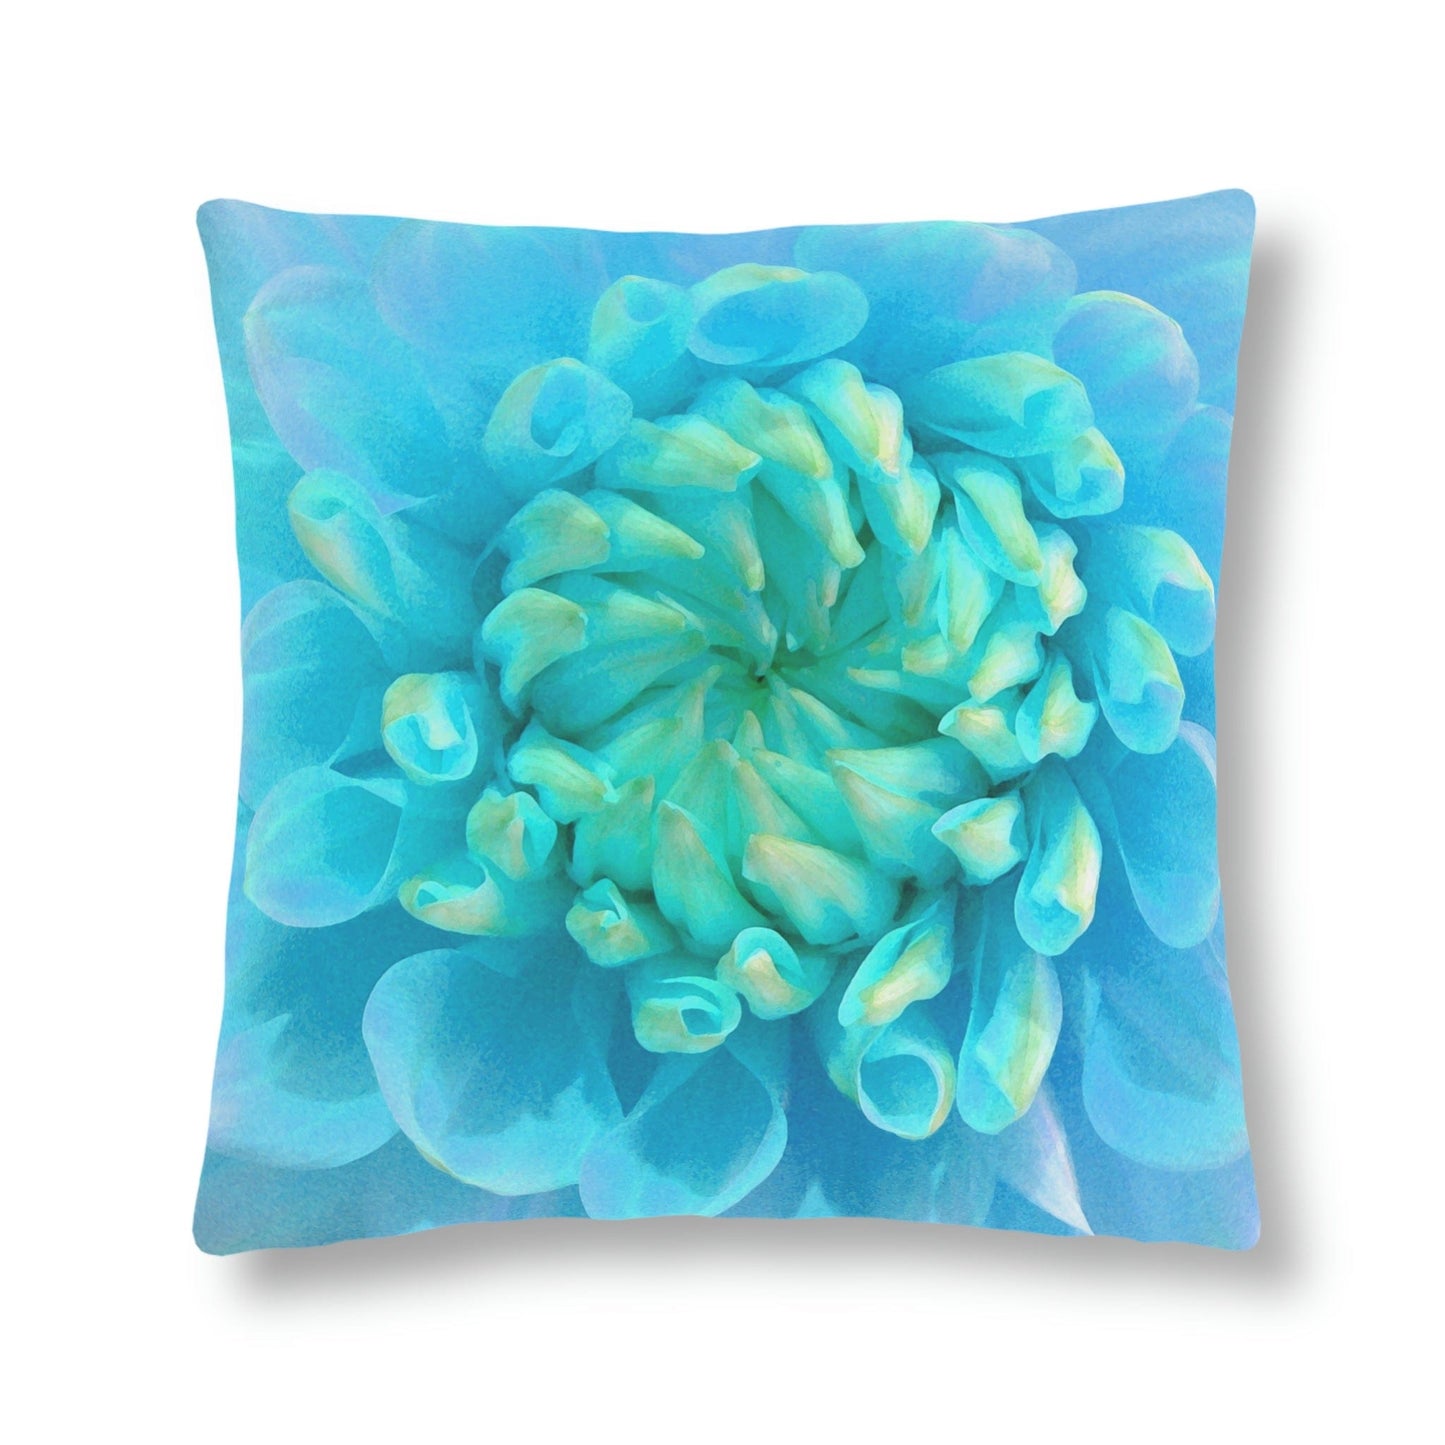 Kate McEnroe New York Outdoor Pillow in Painted Turquoise Dahlia Flower Outdoor Pillows 16" × 16" / Square 21123742034022568419